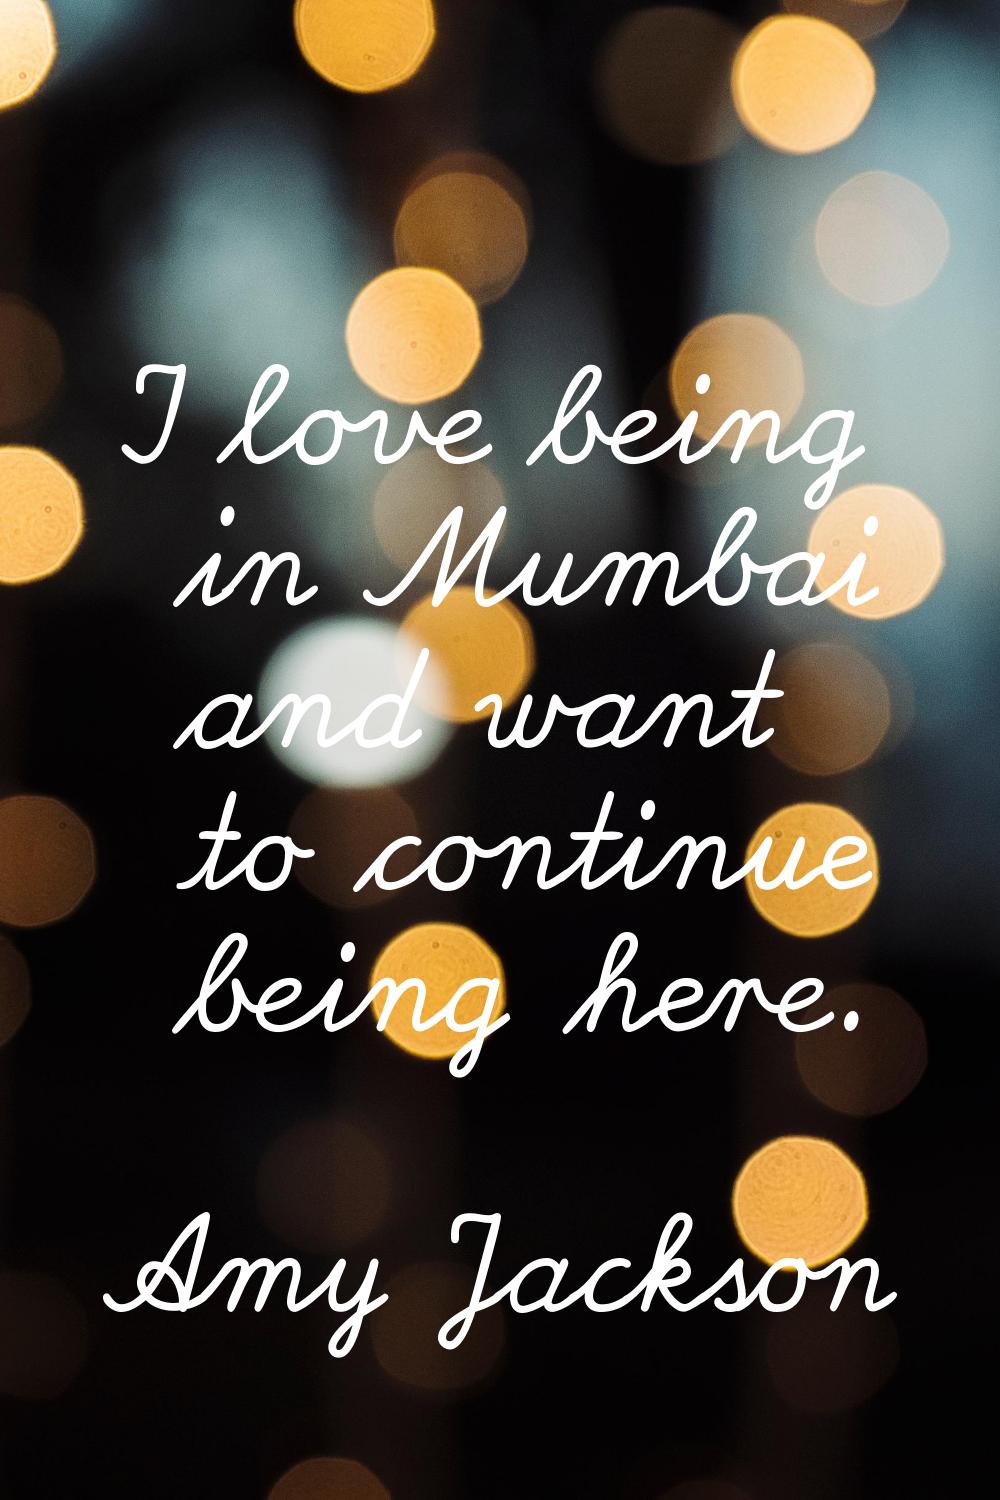 I love being in Mumbai and want to continue being here.